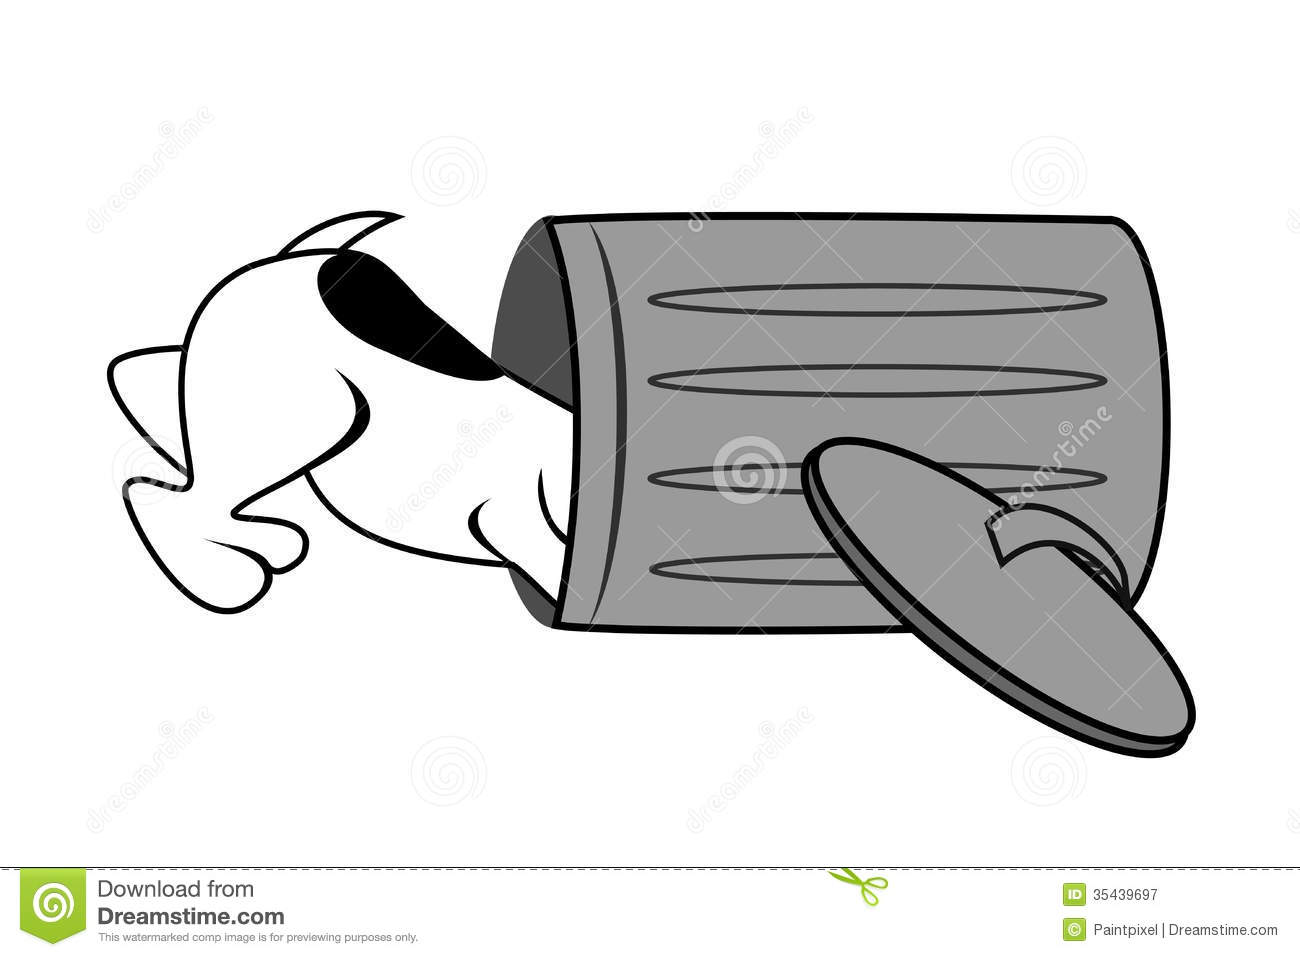 Cartoon Illustration Of A Dog Looking Into A Gray Garbage Bin Lying On